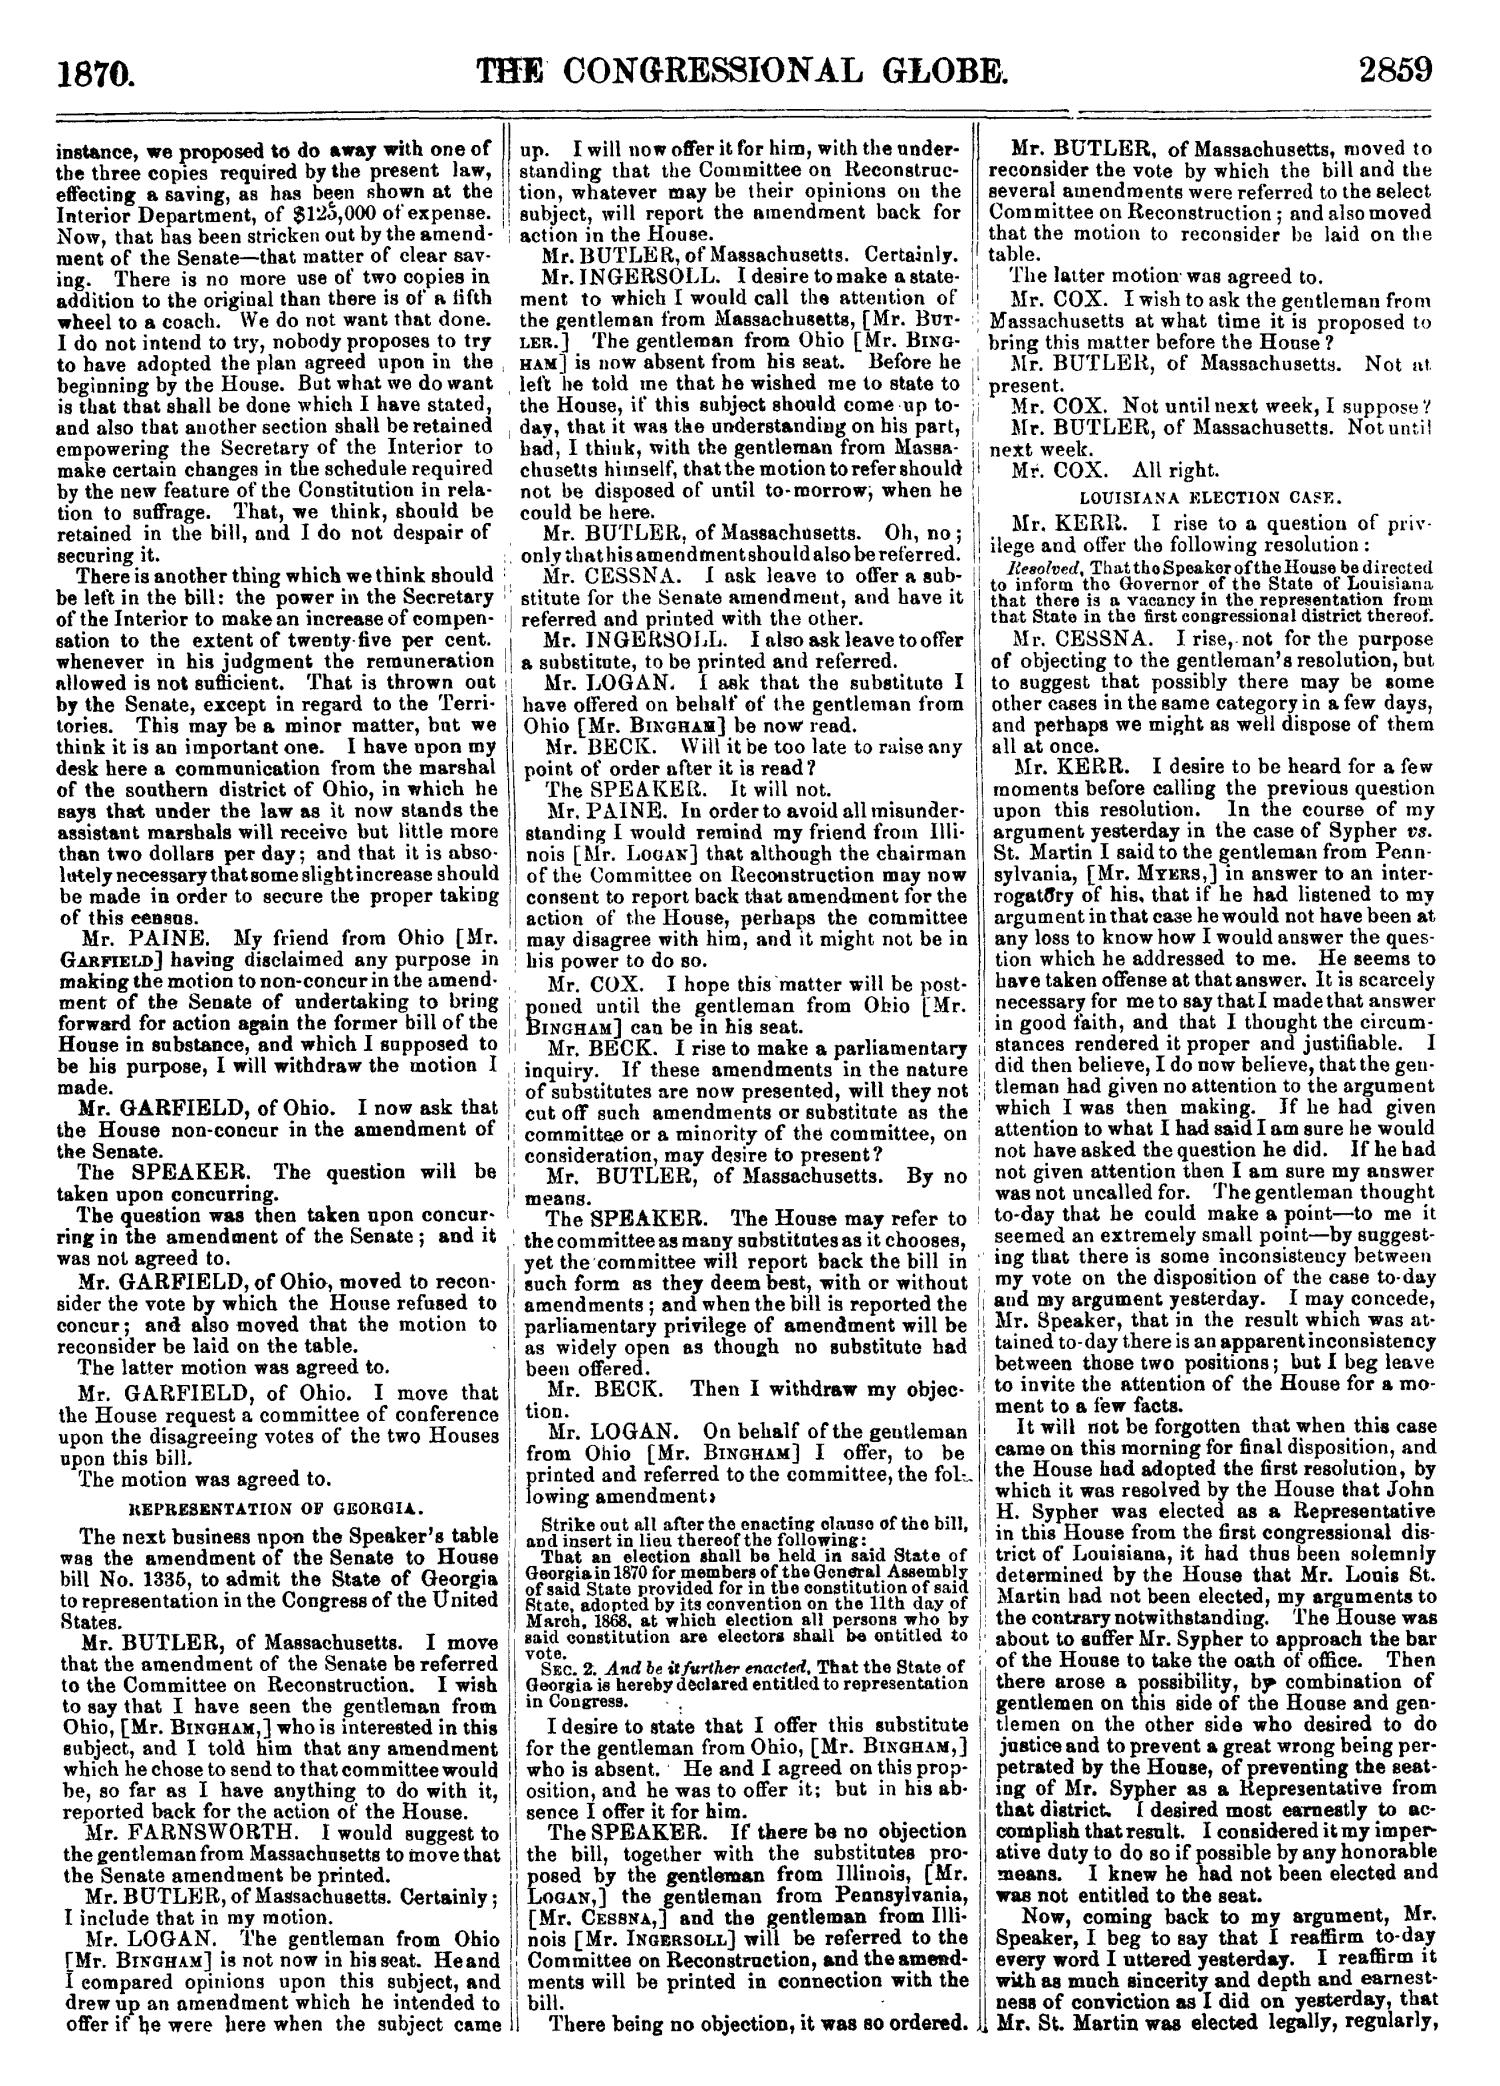 The Congressional Globe: Containing the Debates and Proceedings of the Second Session Forty-First Congress; Together with an Appendix, Embracing the Laws Passed at that Session
                                                
                                                    2859
                                                